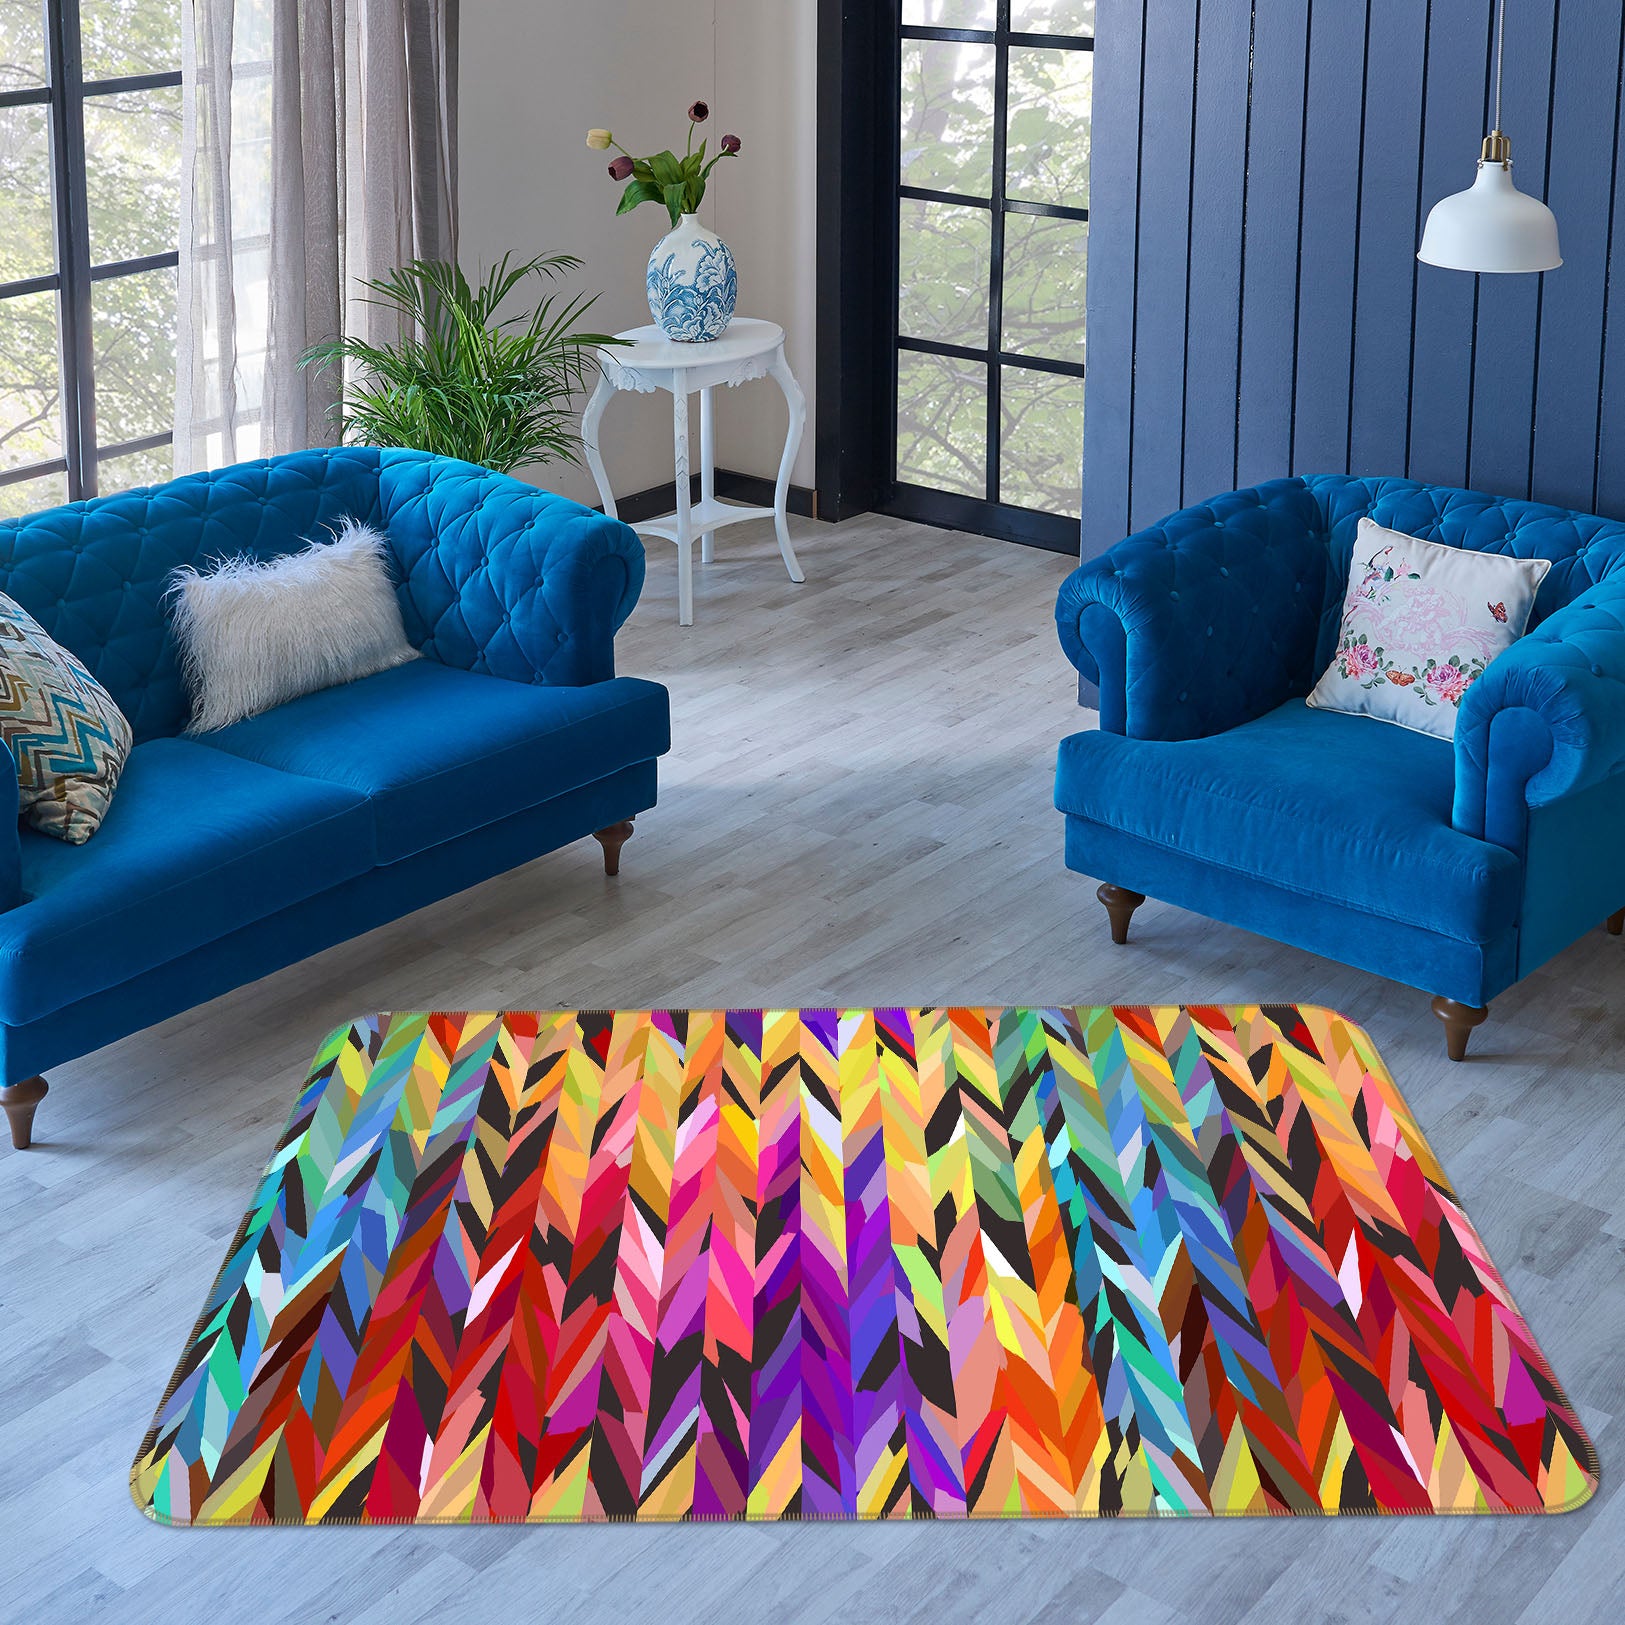 3D Colorful Pattern 1049 Shandra Smith Rug Non Slip Rug Mat